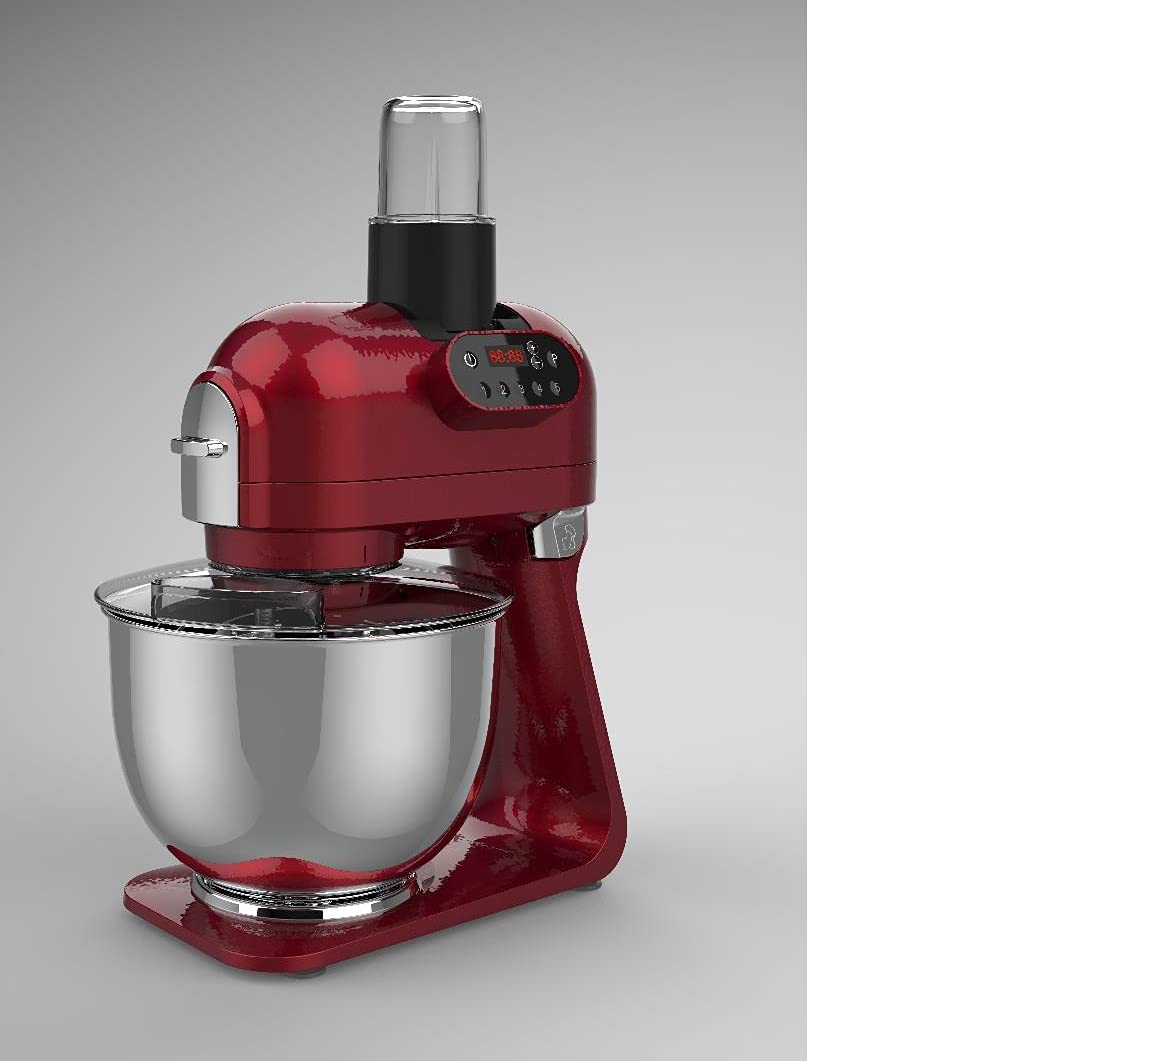 Hafele Klara Red Blender with Mixing Bowl, Mixing Attachments